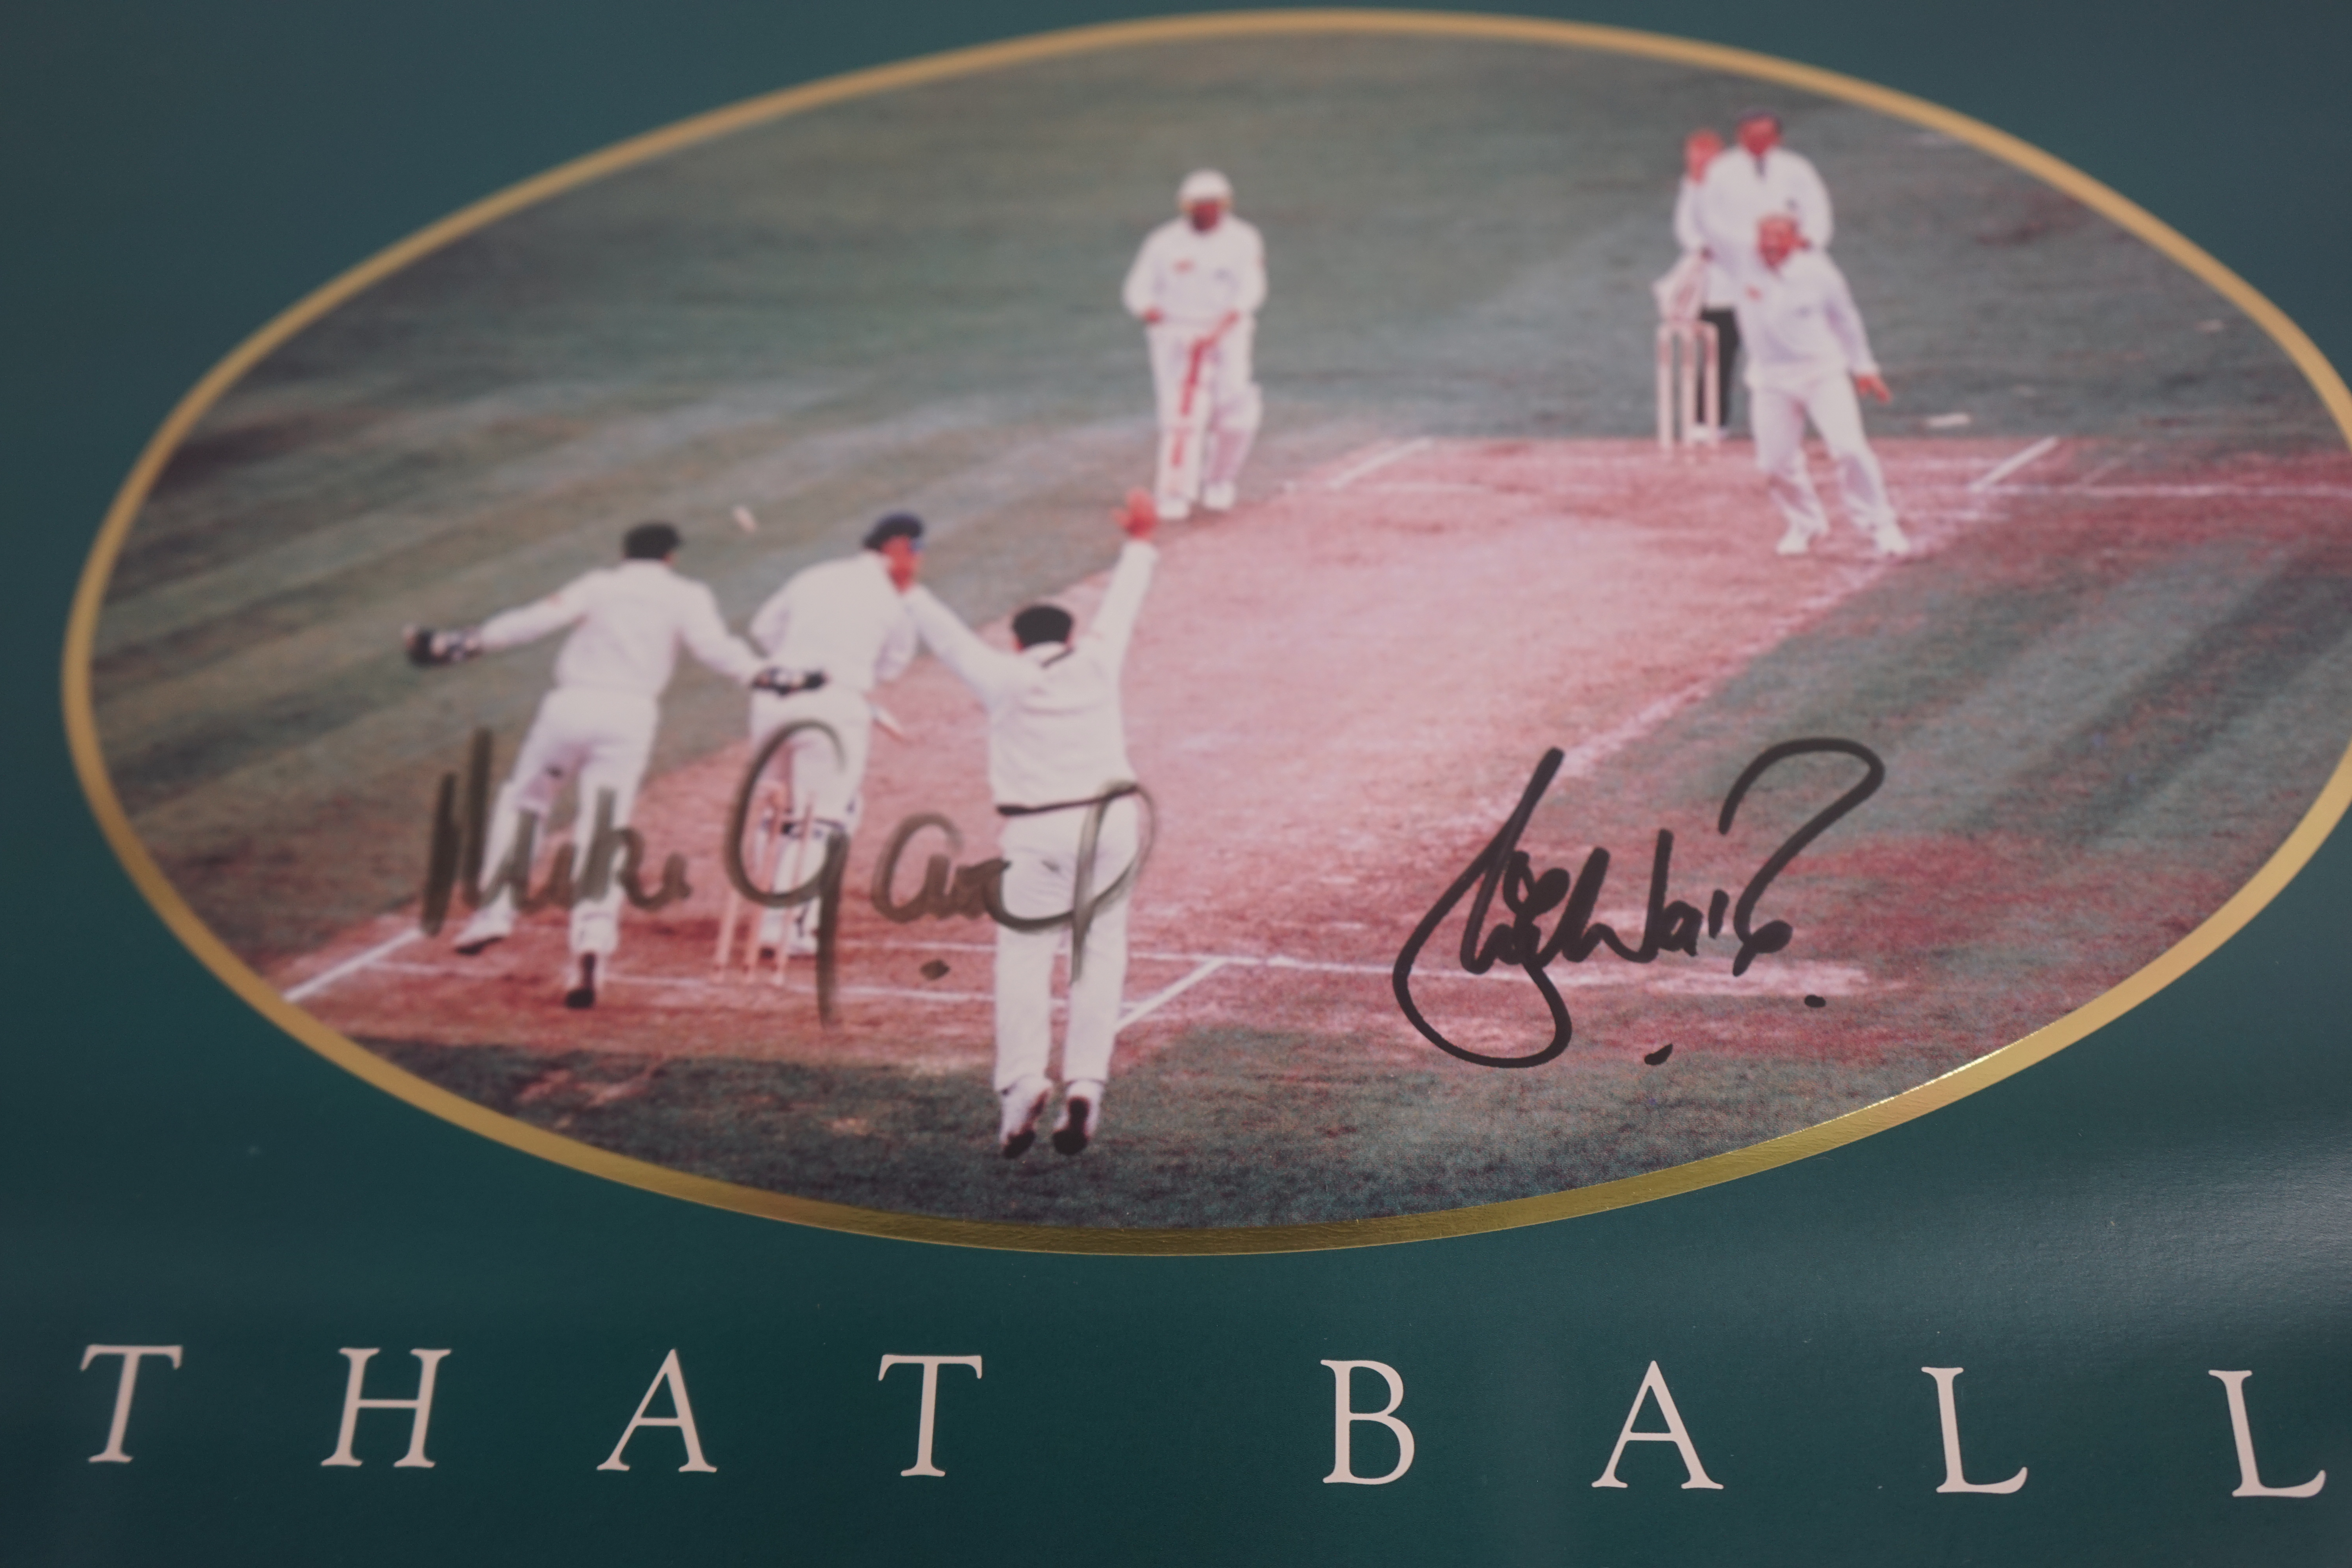 Shane Warne 'That Ball' signed framed poster, limited edition - Image 3 of 3